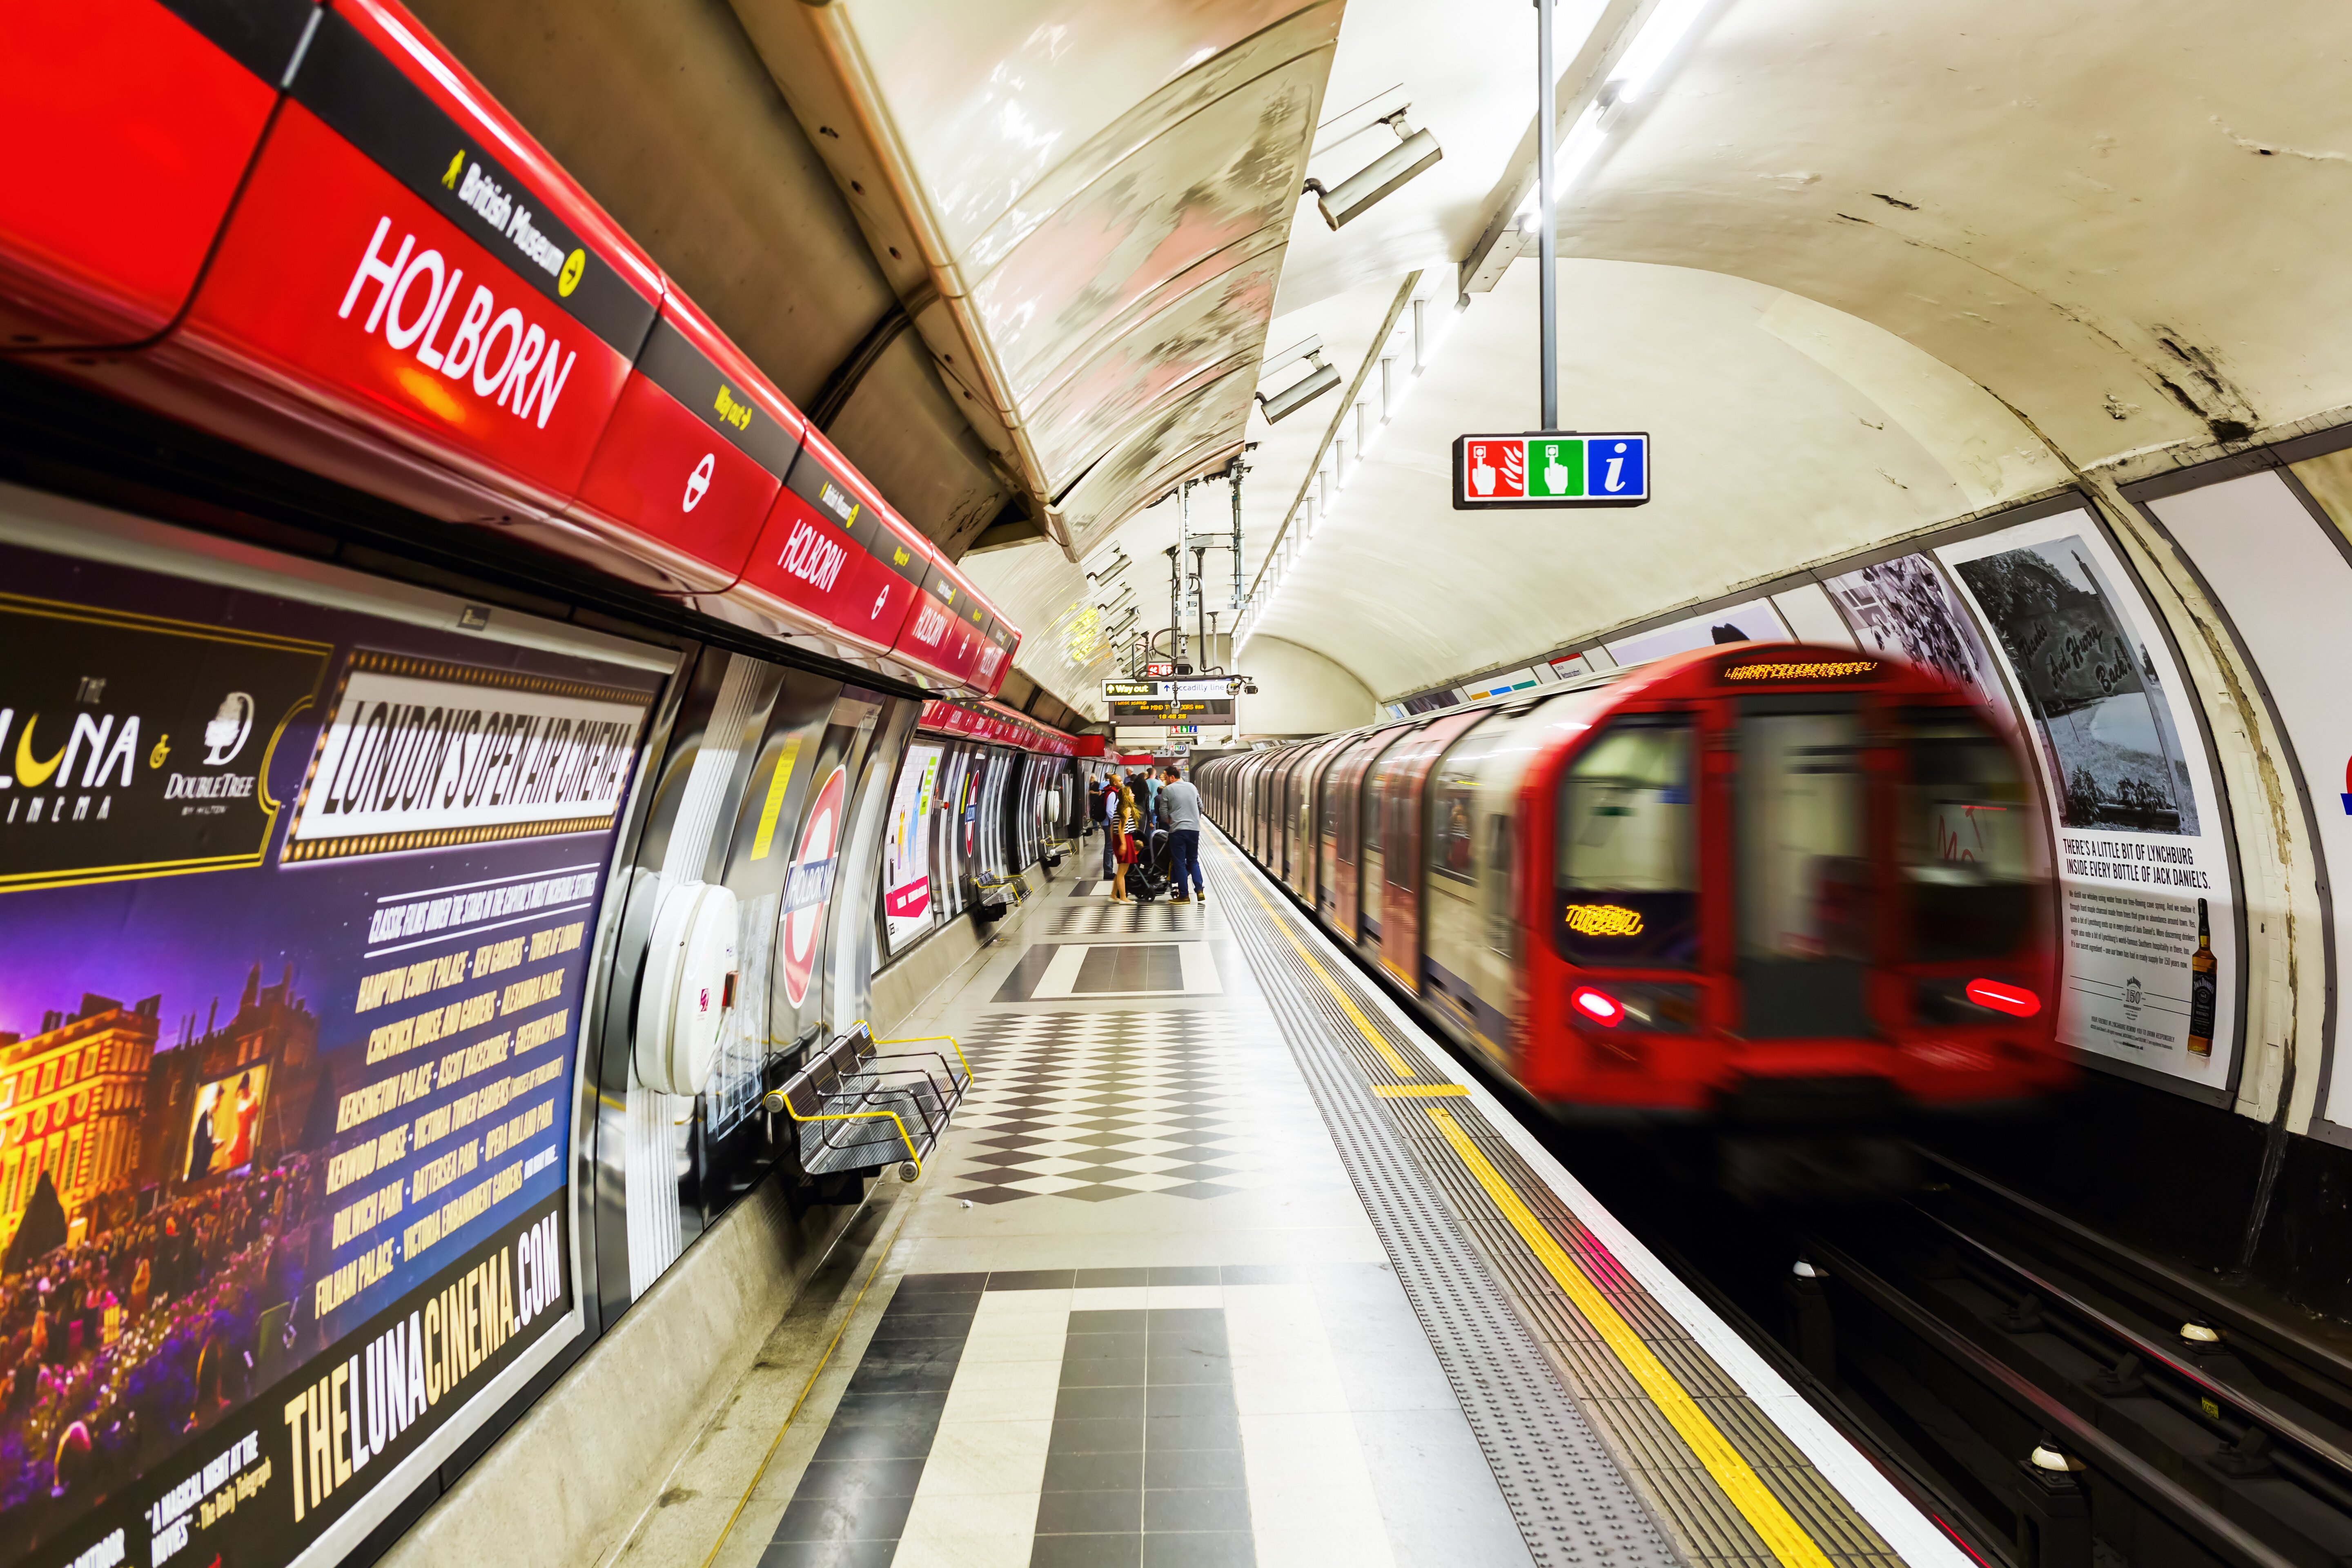 London's Night Tube may not return until 2022 despite hospitality reopening